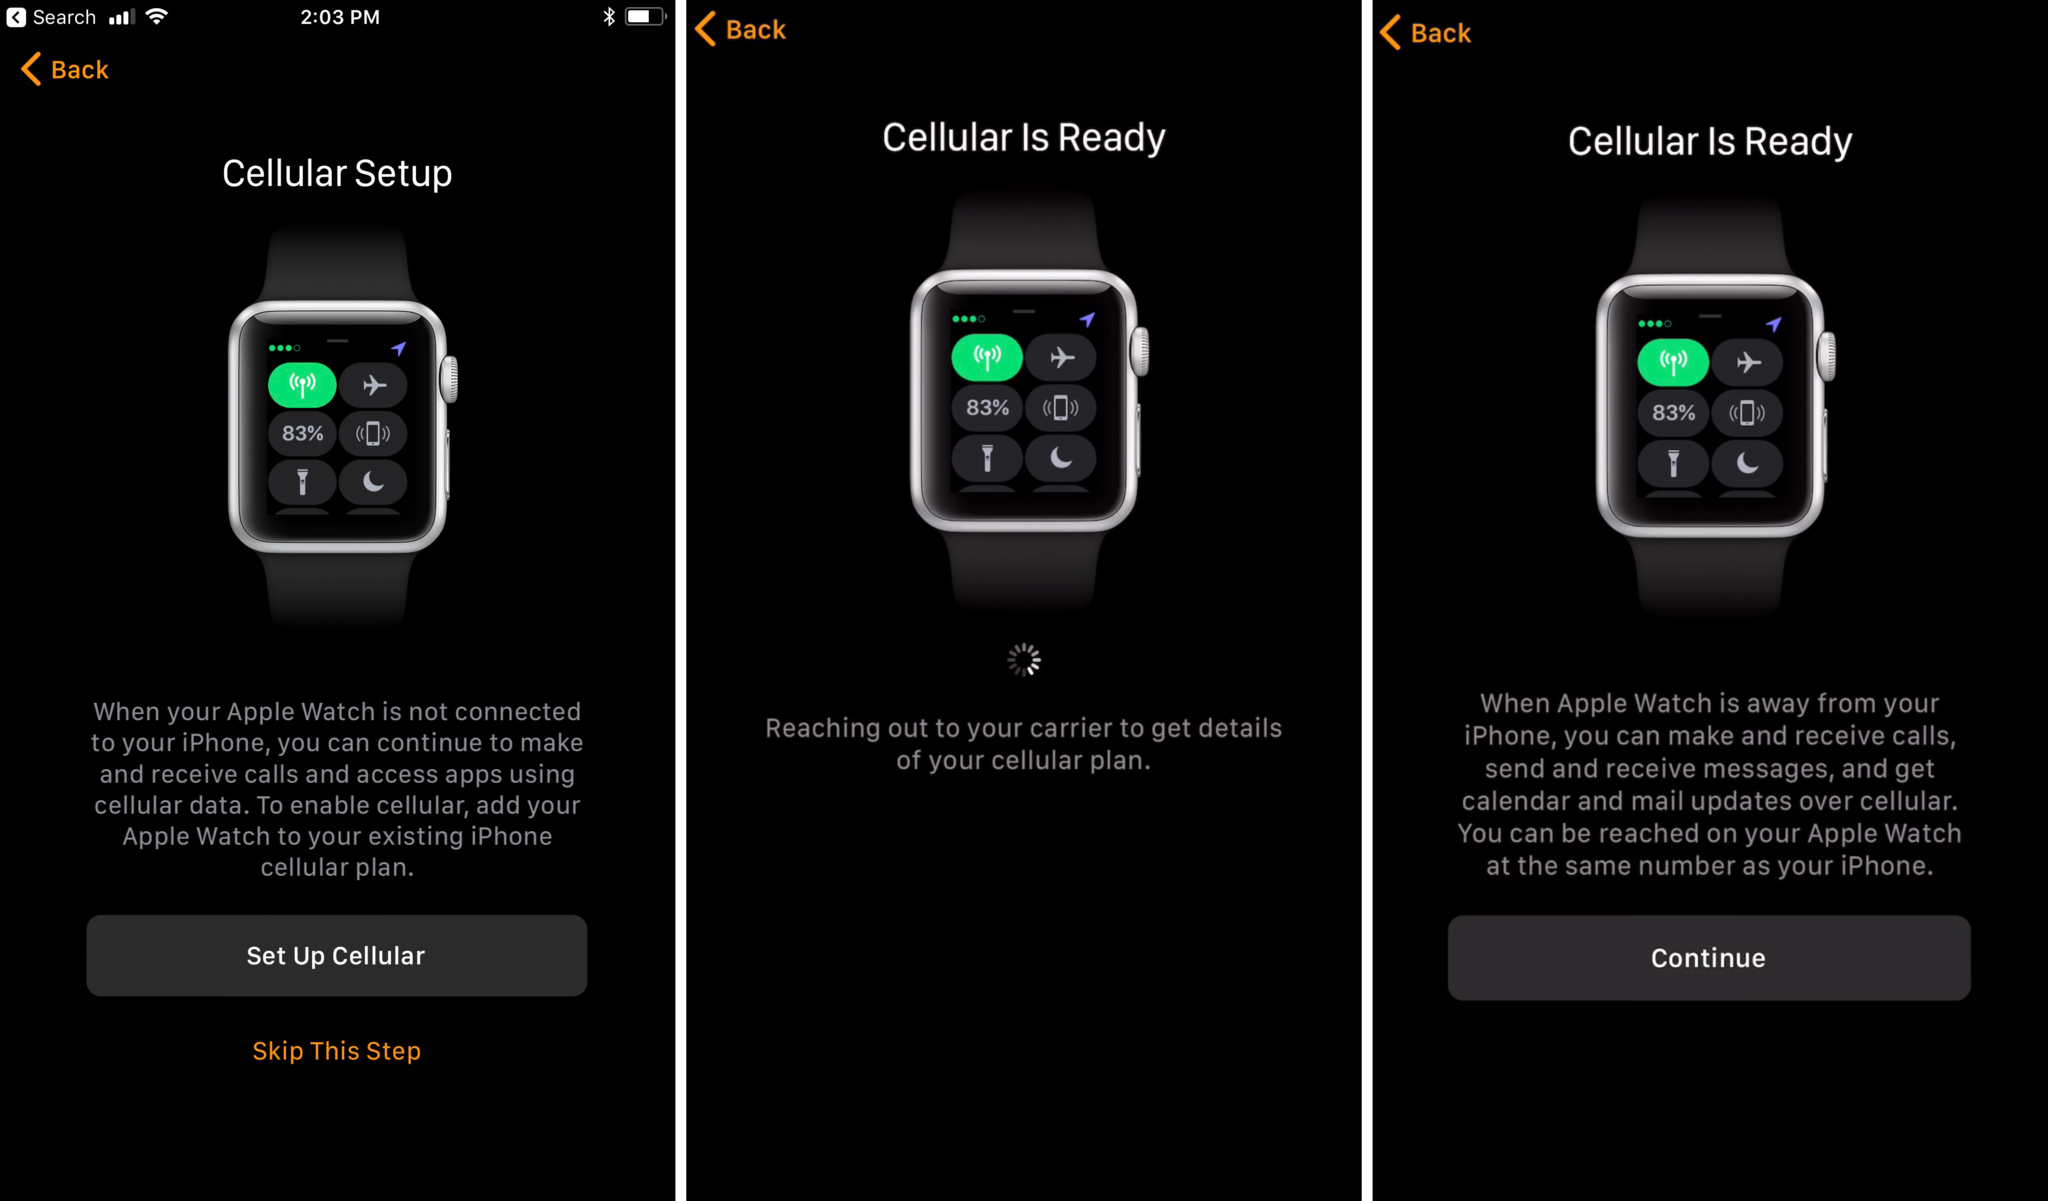 Apple Watch setting up cellular